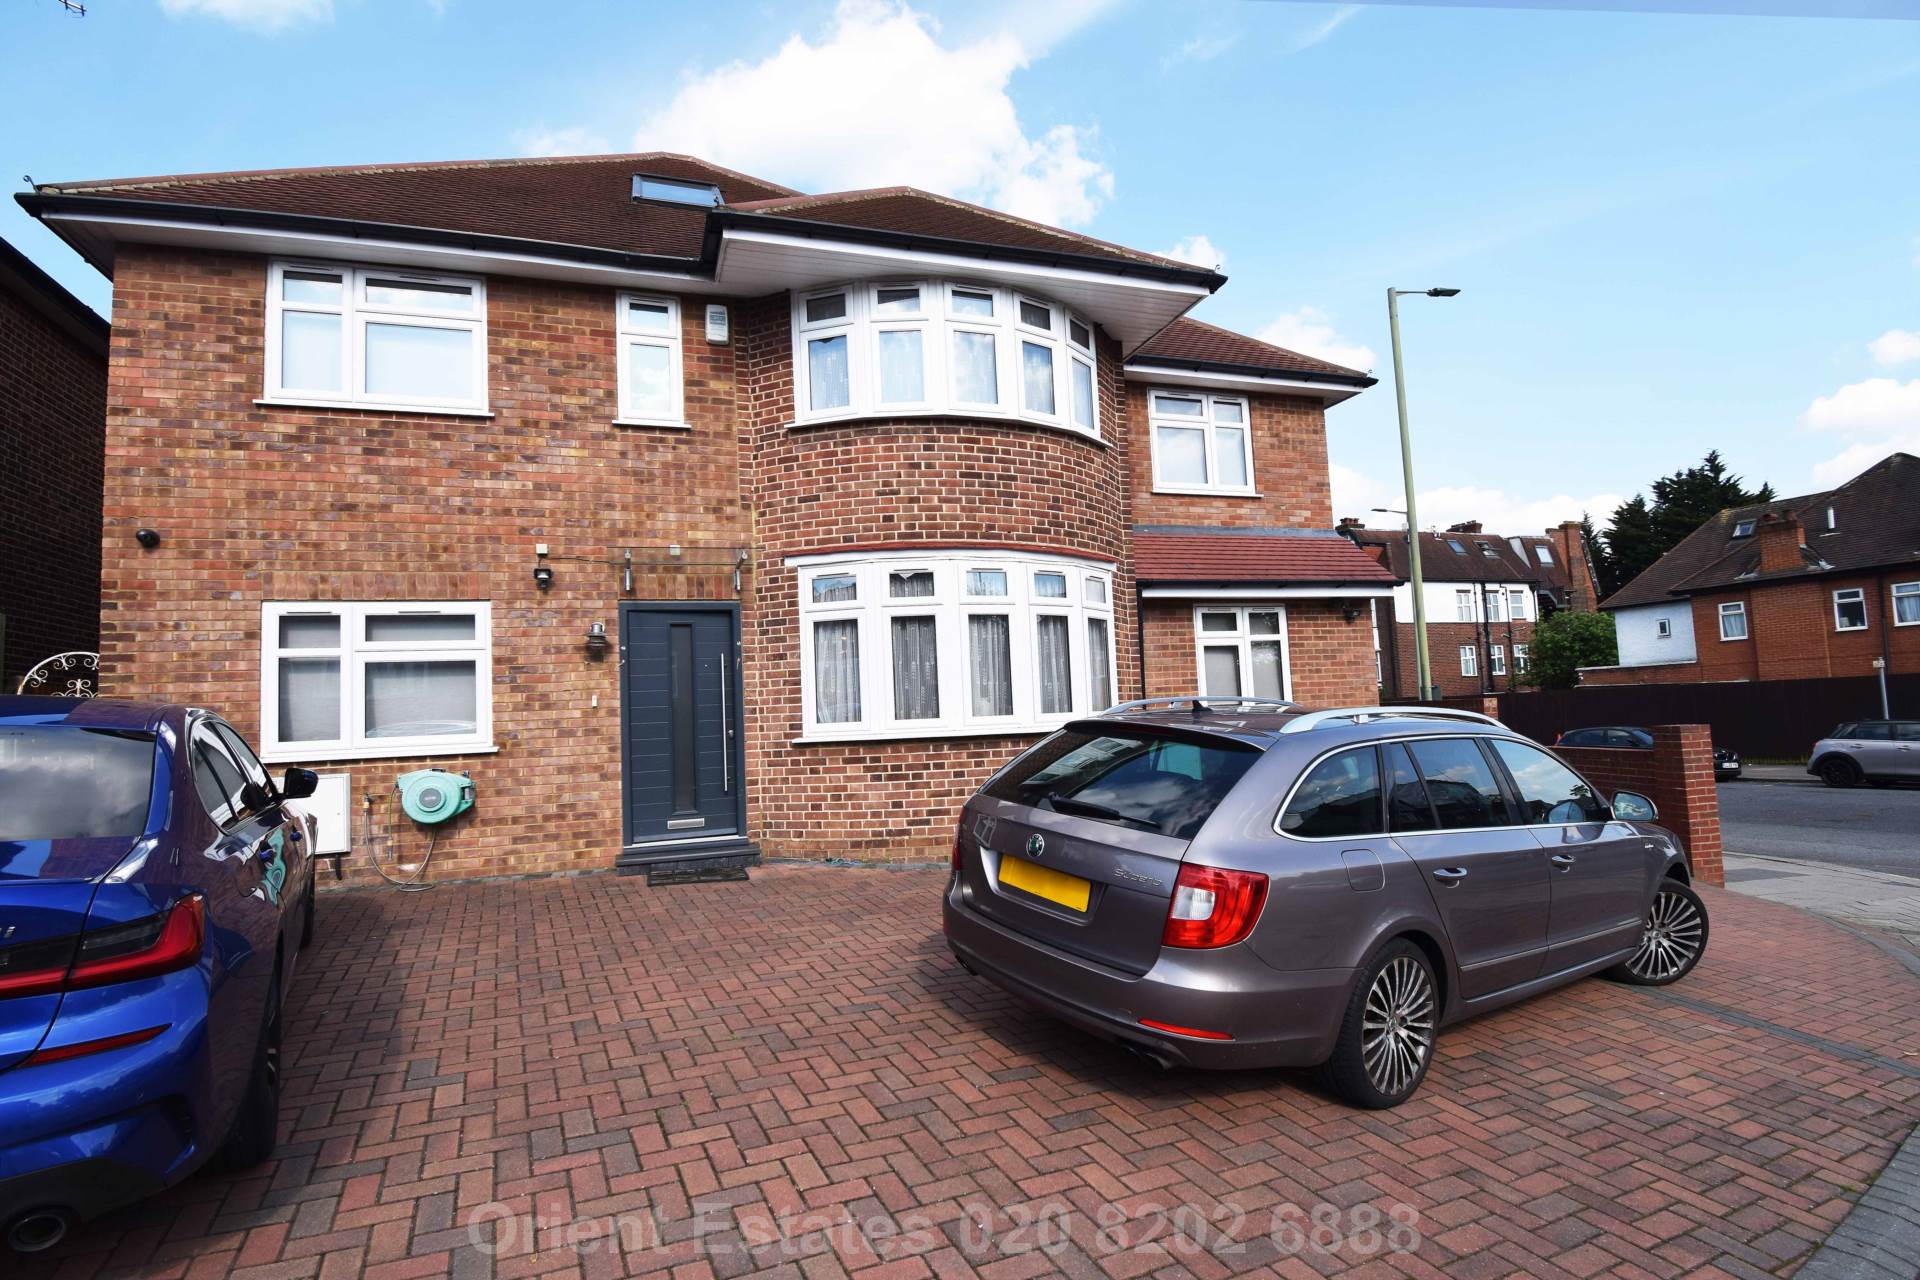 5 bed Detached House for rent in London. From Orient Estates